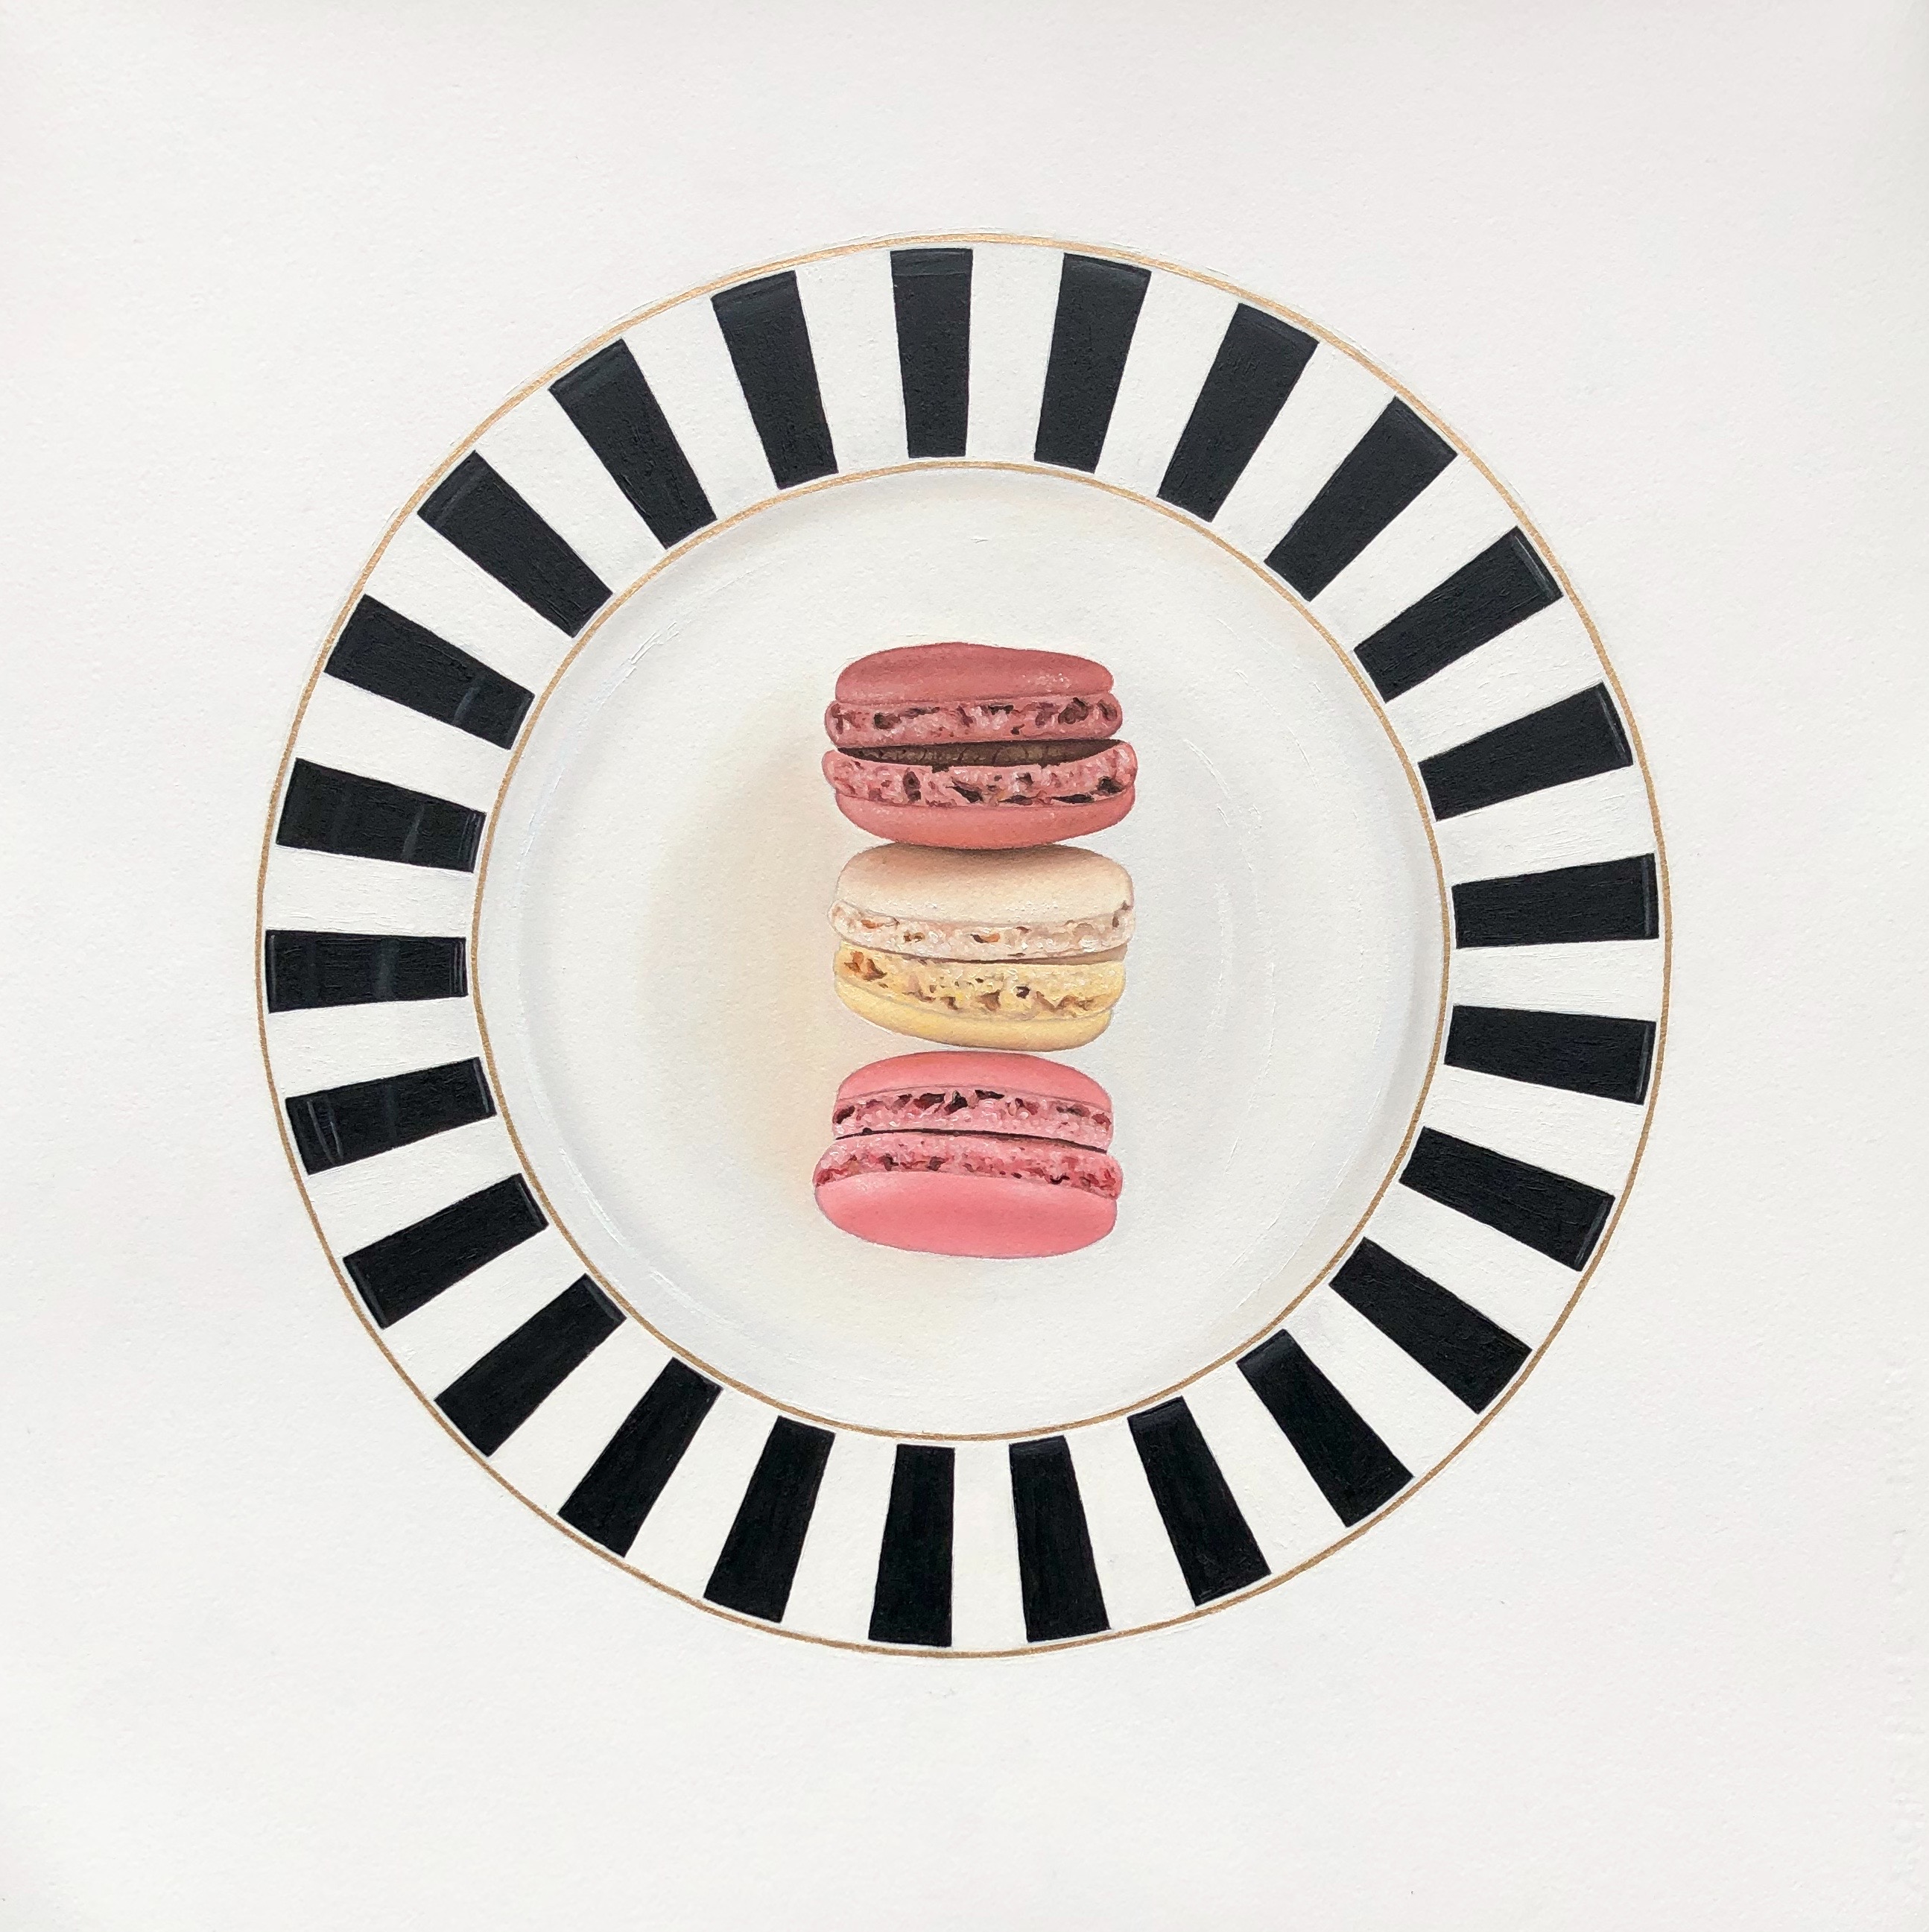 Macaroons 1, 2019 Paula Urzica Oil on Arches oil paper, 22in x 22in